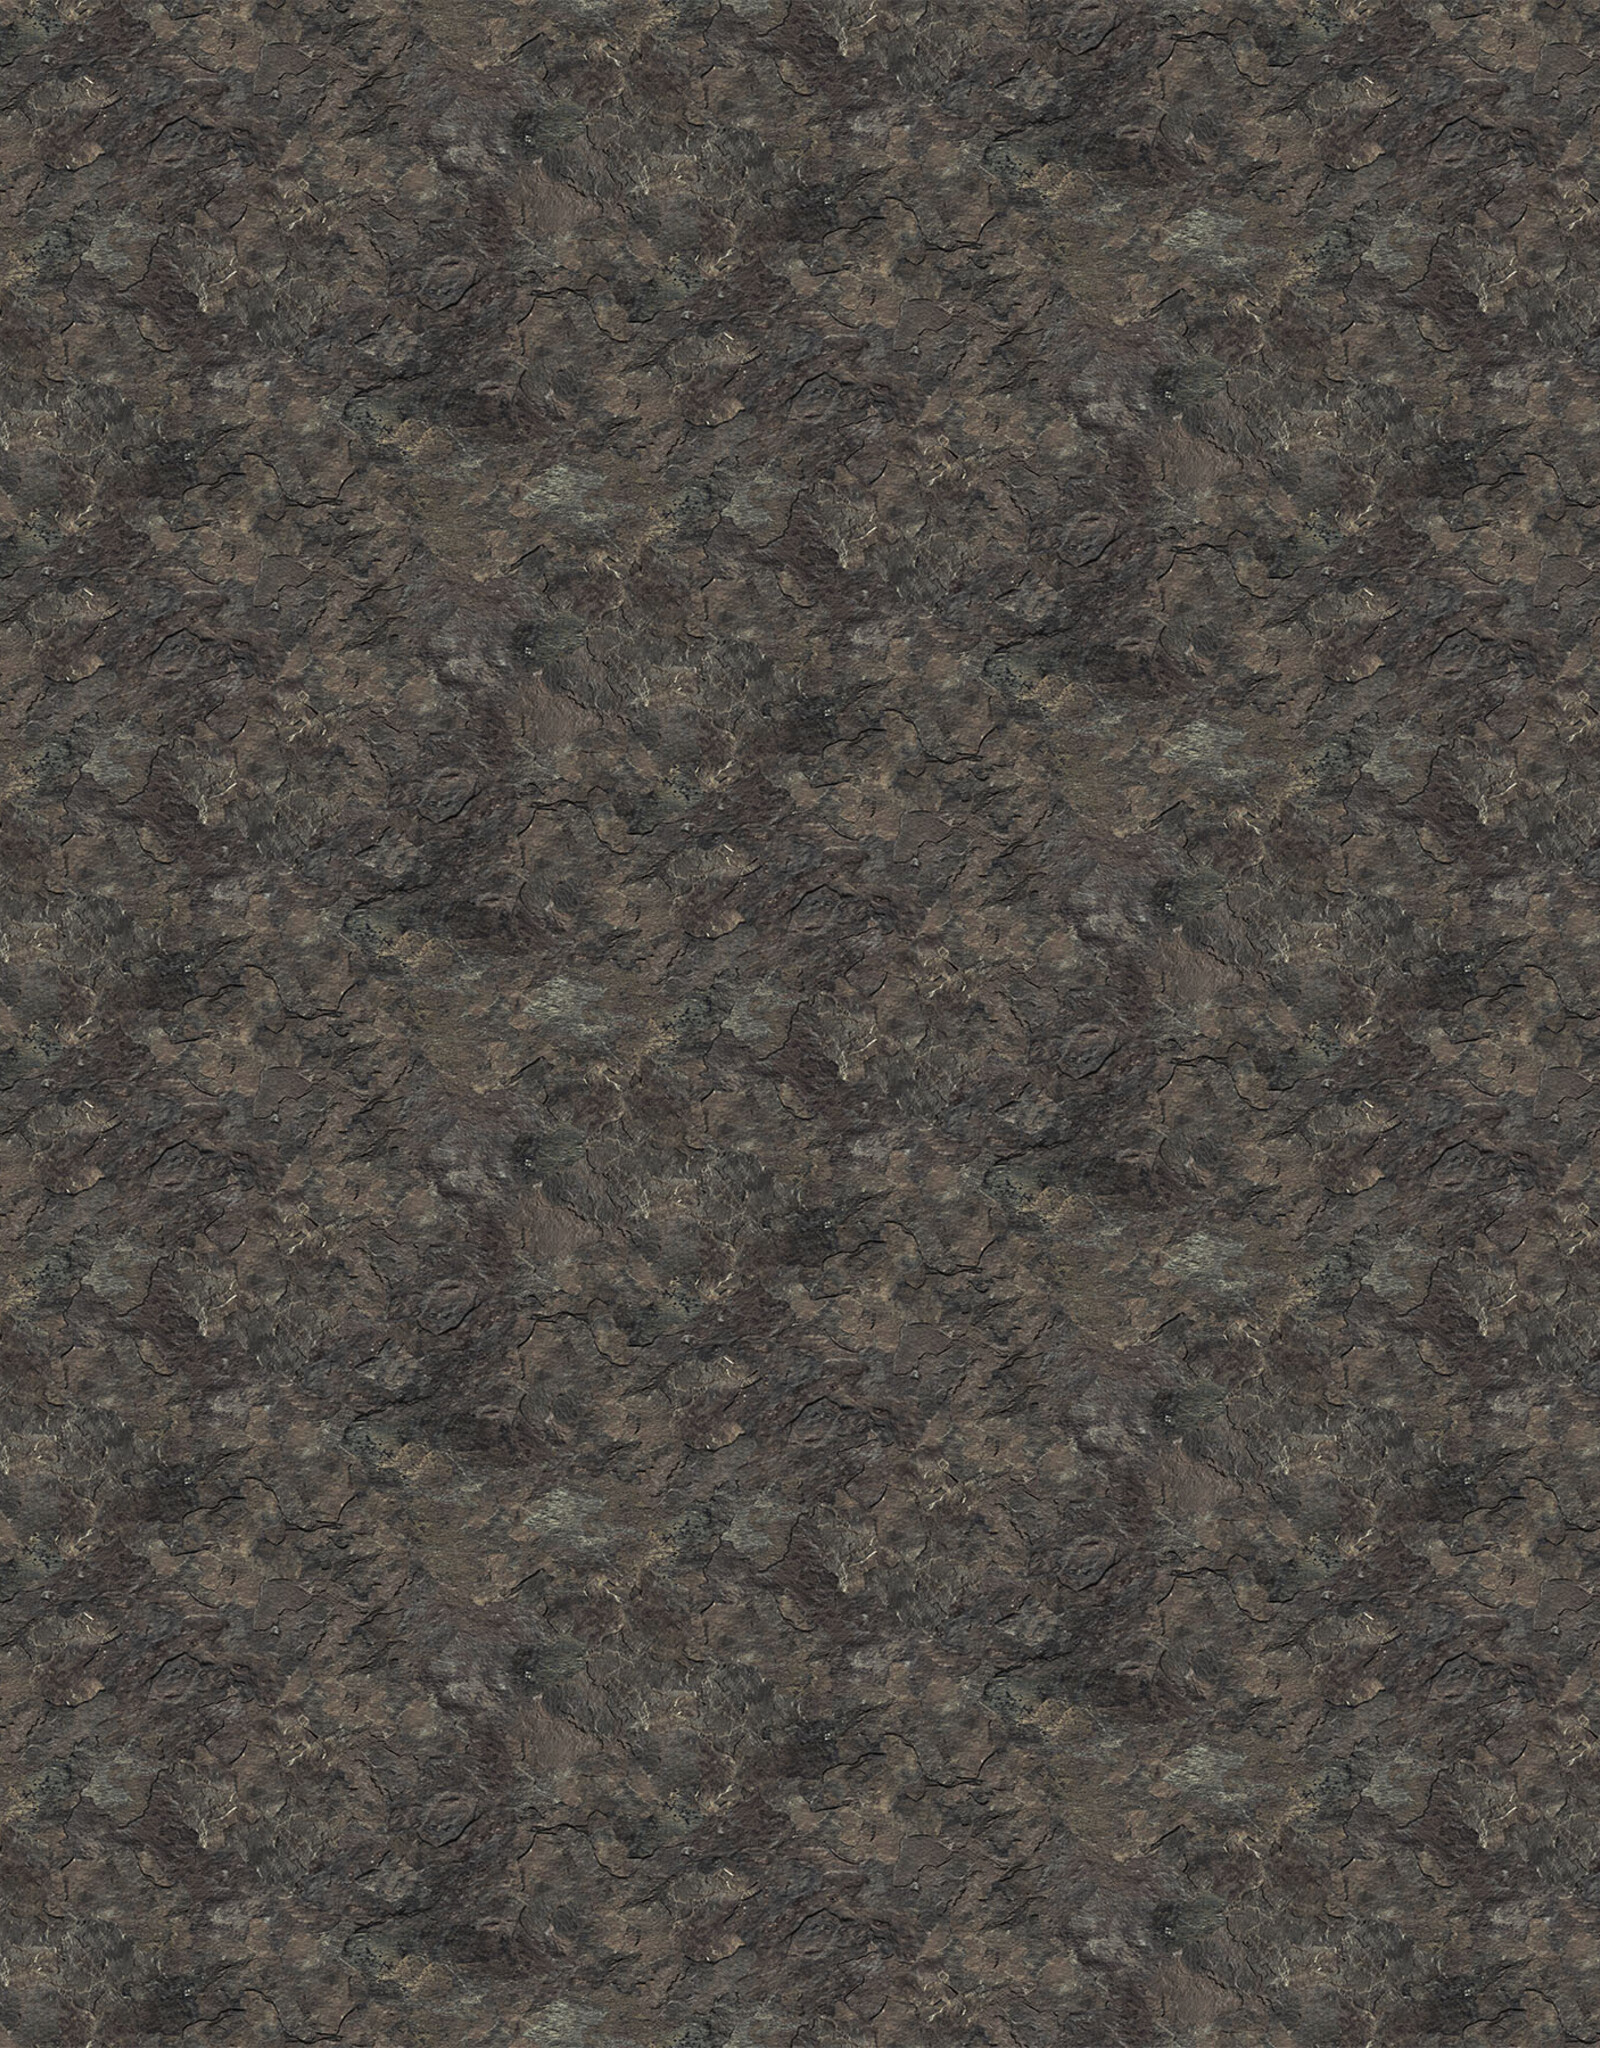 Northcott Naturescapes  Slate - Charcoal Gray 25496-97